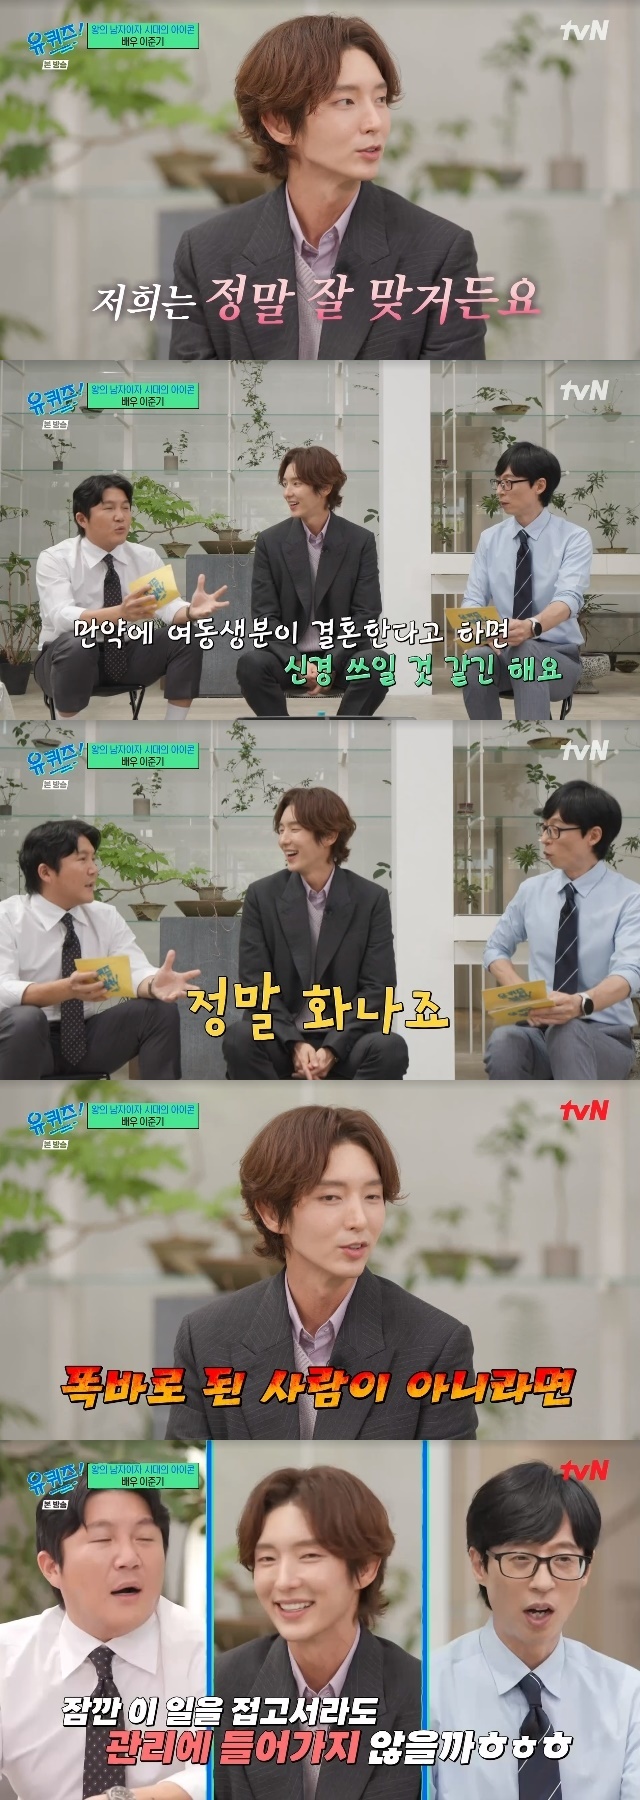 Actor Lee Joon-gi showed off his younger sister and deep friendship.Actor Lee Joon-gi appeared as a guest in the 209th episode of The Last Chance of tvN entertainment show You Quiz on the Block (hereinafter referred to as You Quiz on the Block), which aired on August 30.On this day, Lee Joon-gi revealed that he has been living with a younger sister since 2013, which is also the opponent of Jujitsu sparring.Lee Joon-gi said, People who know us well say, The reason we cant both get married is because were stuck together. We care about each other so much. Were really good together. We do so many things together in life.Jujitsu also said, When I learned it, I thought it would be great to train and protect my body, so I dragged him to try it. It was fun and I liked doing it with my brother, so I went to competitions, won awards, and practiced it for three and a half years.Lee Joon-gi responded to Yoo Jae-suks admiration for the younger sister and her brothers extraordinary friendship, saying, I wish we could do it together. We live together anyway. I also suffer a lot for myself.I am thankful that I have been able to concentrate on my work. Lee Joon-gi said, Im really angry. If youre not a straight person, I think youll be able to take care of this for a while, adding, Its a really precious family.